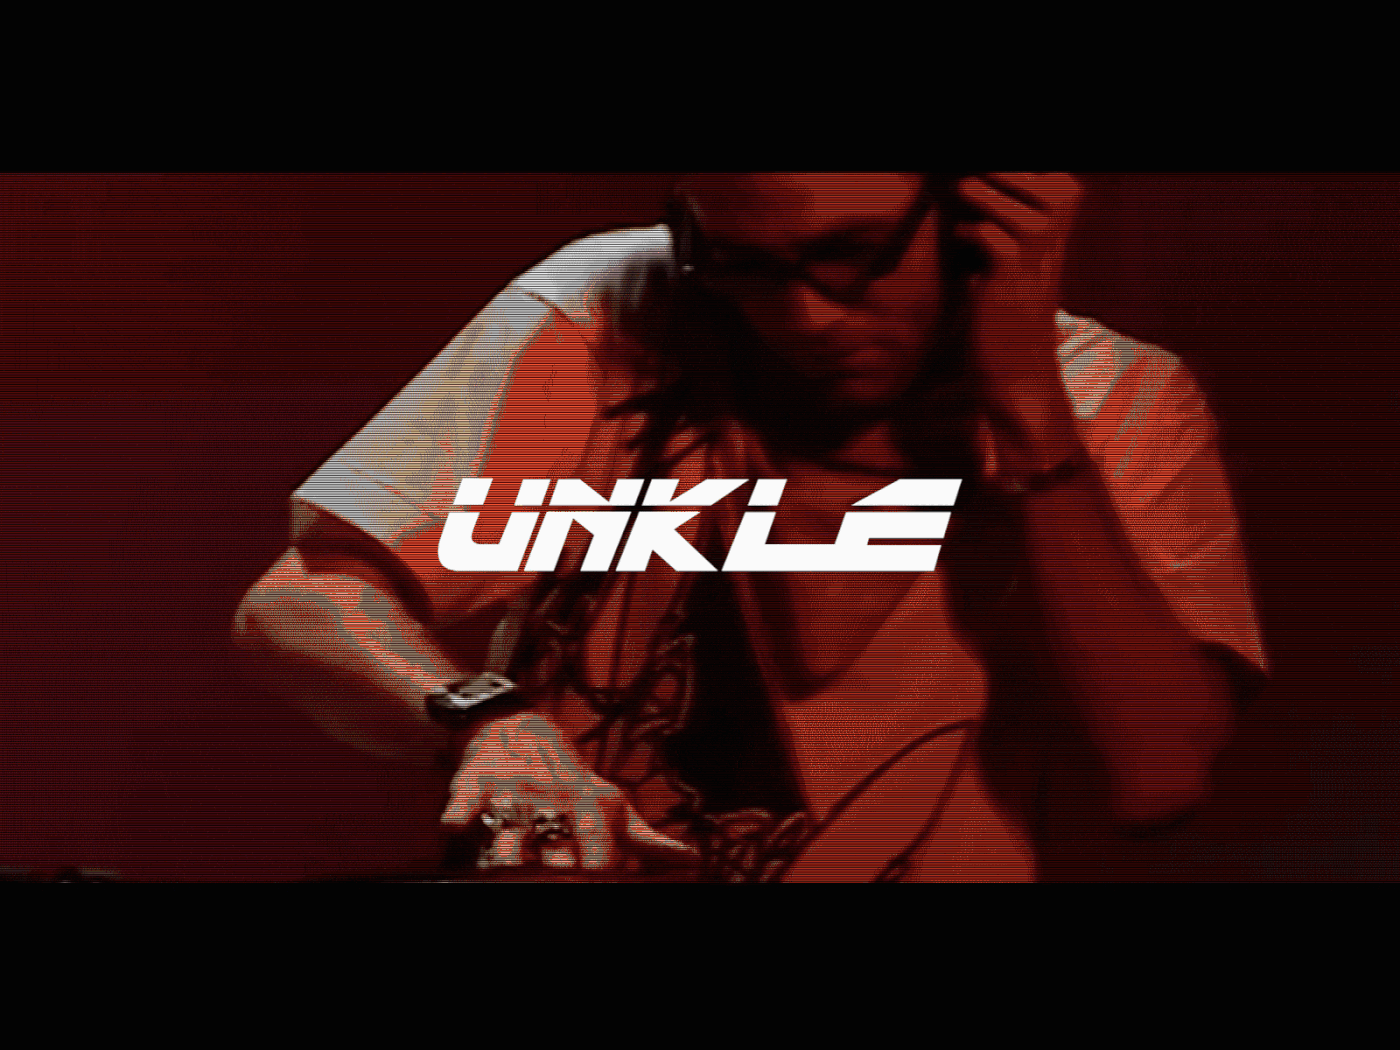 Unkle trip hop electro dj sample mowax Lavelle Minimalism after effects Adobe XD